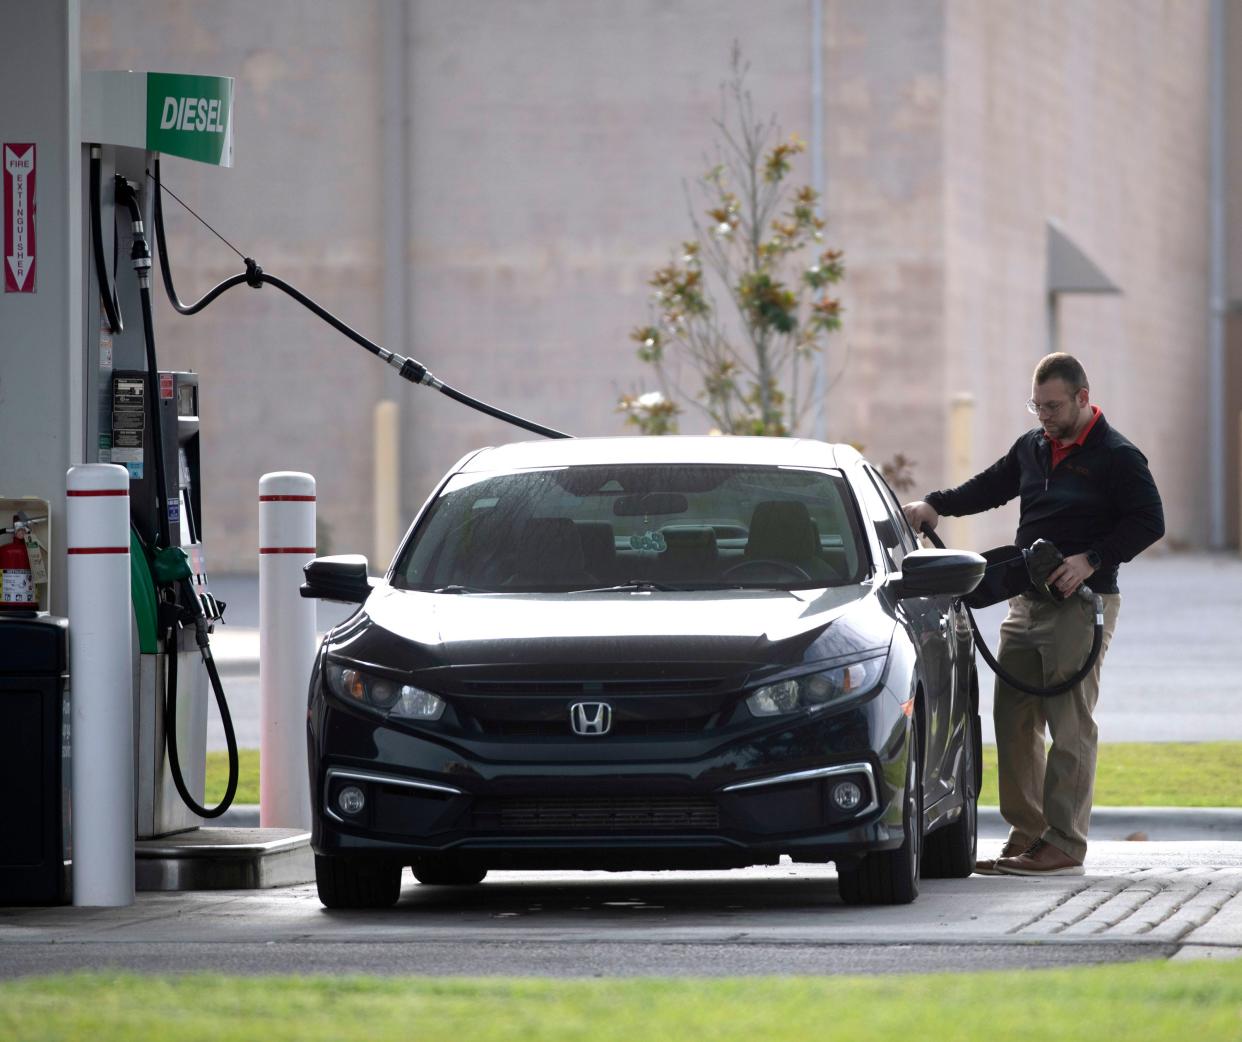 A motorist fills up his tank Thursday at BJ's Wholesale Club on North Davis Highway in Pensacola.